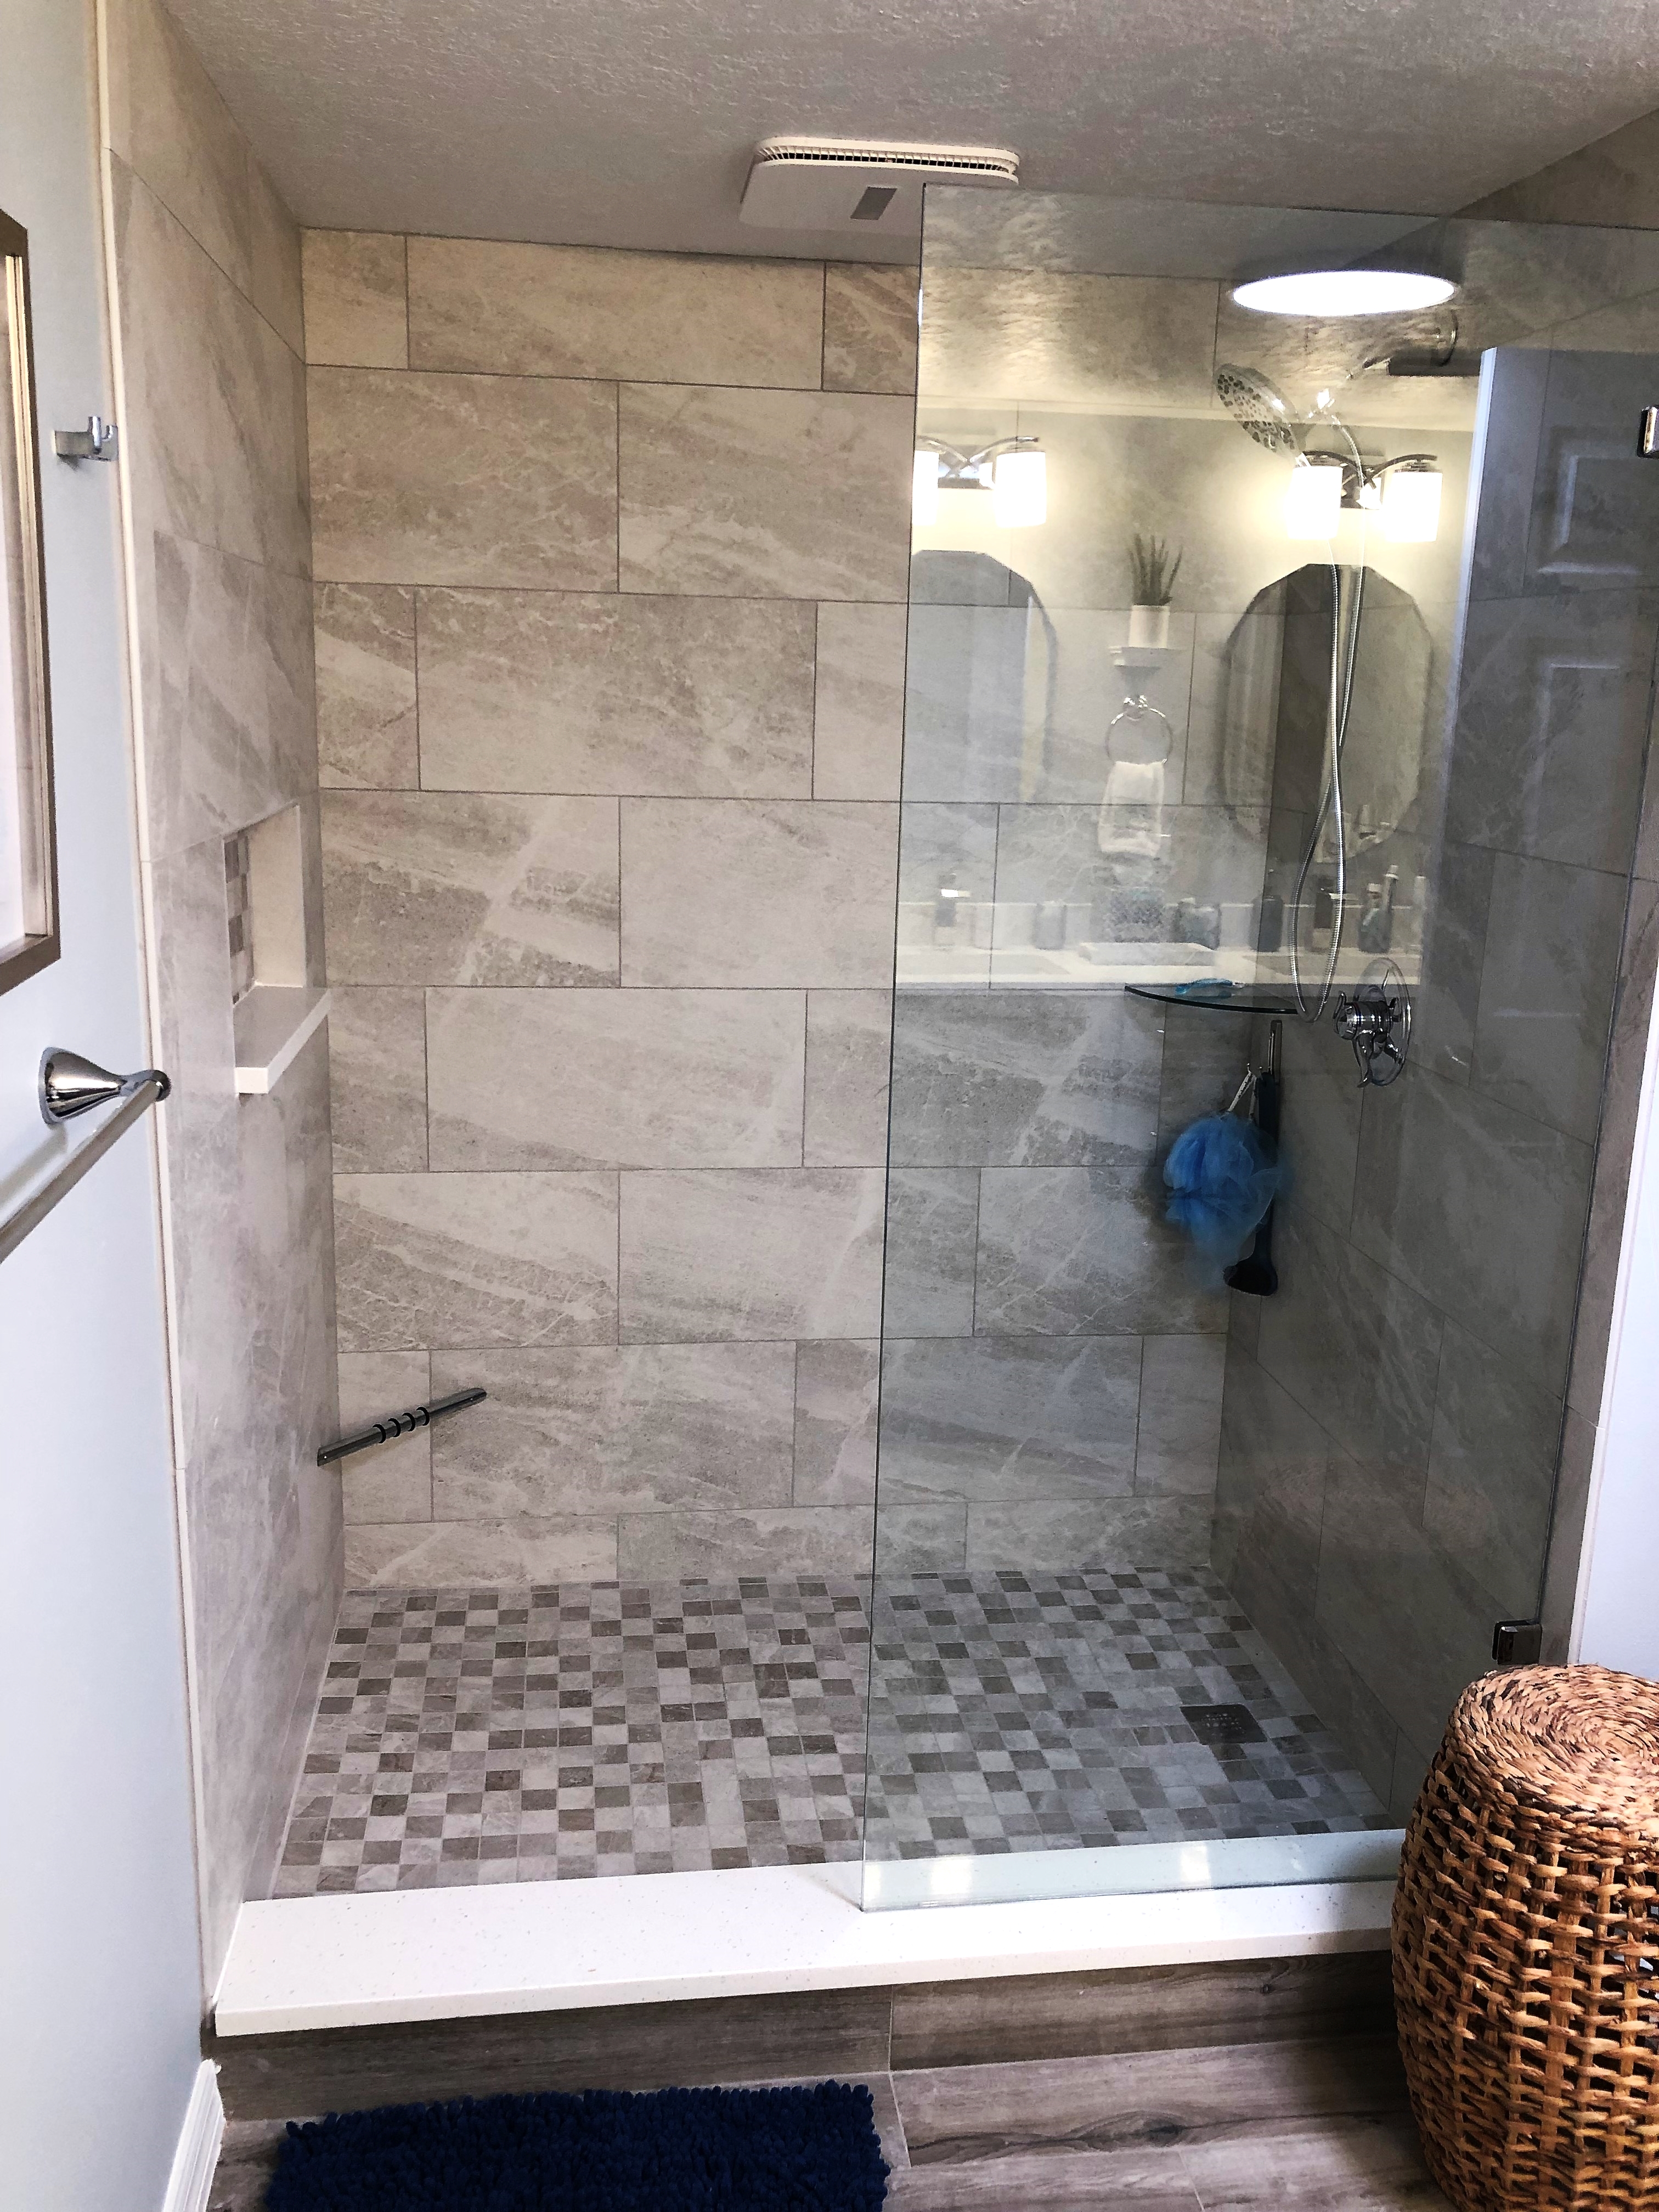 Porcelain tiled shower with niche, glass corner shelf, and heavy clear glass panel.